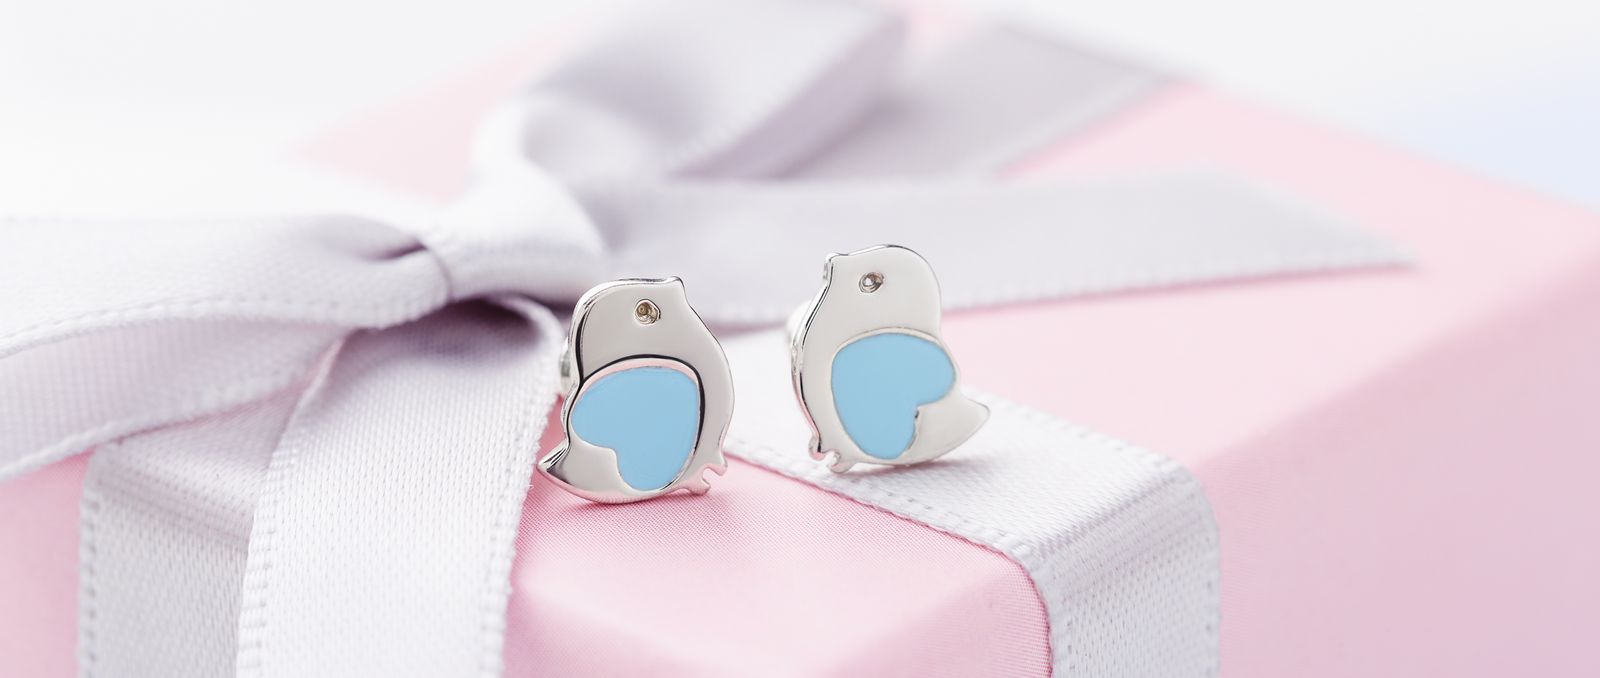 Bird shape with blue heart earring studs pink gift box with bow